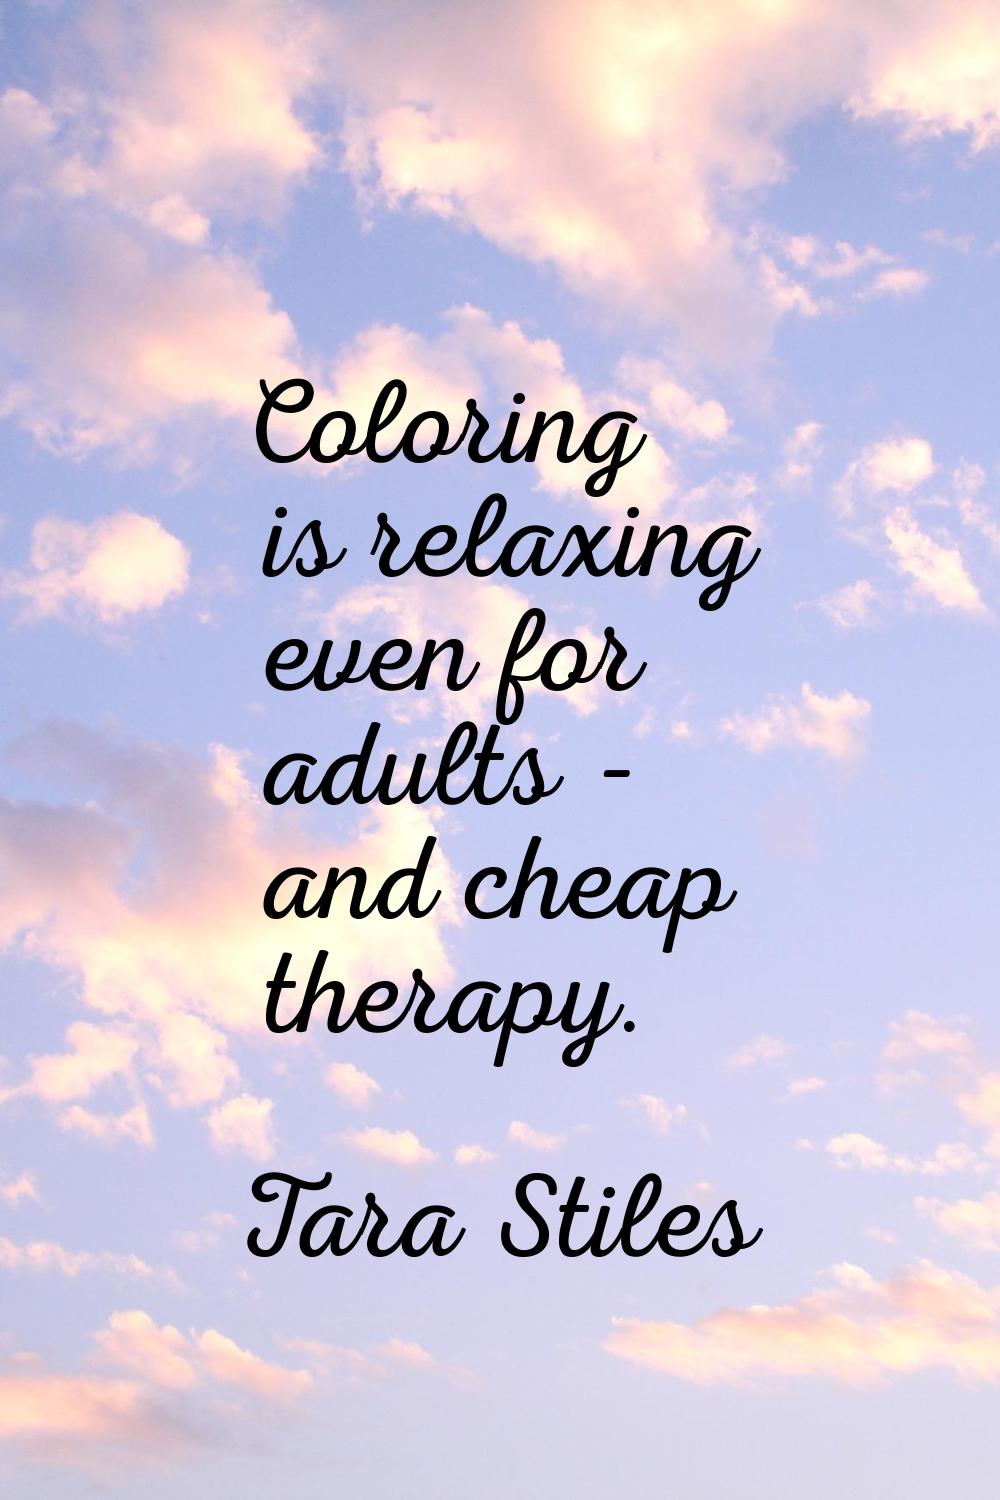 Coloring is relaxing even for adults - and cheap therapy.